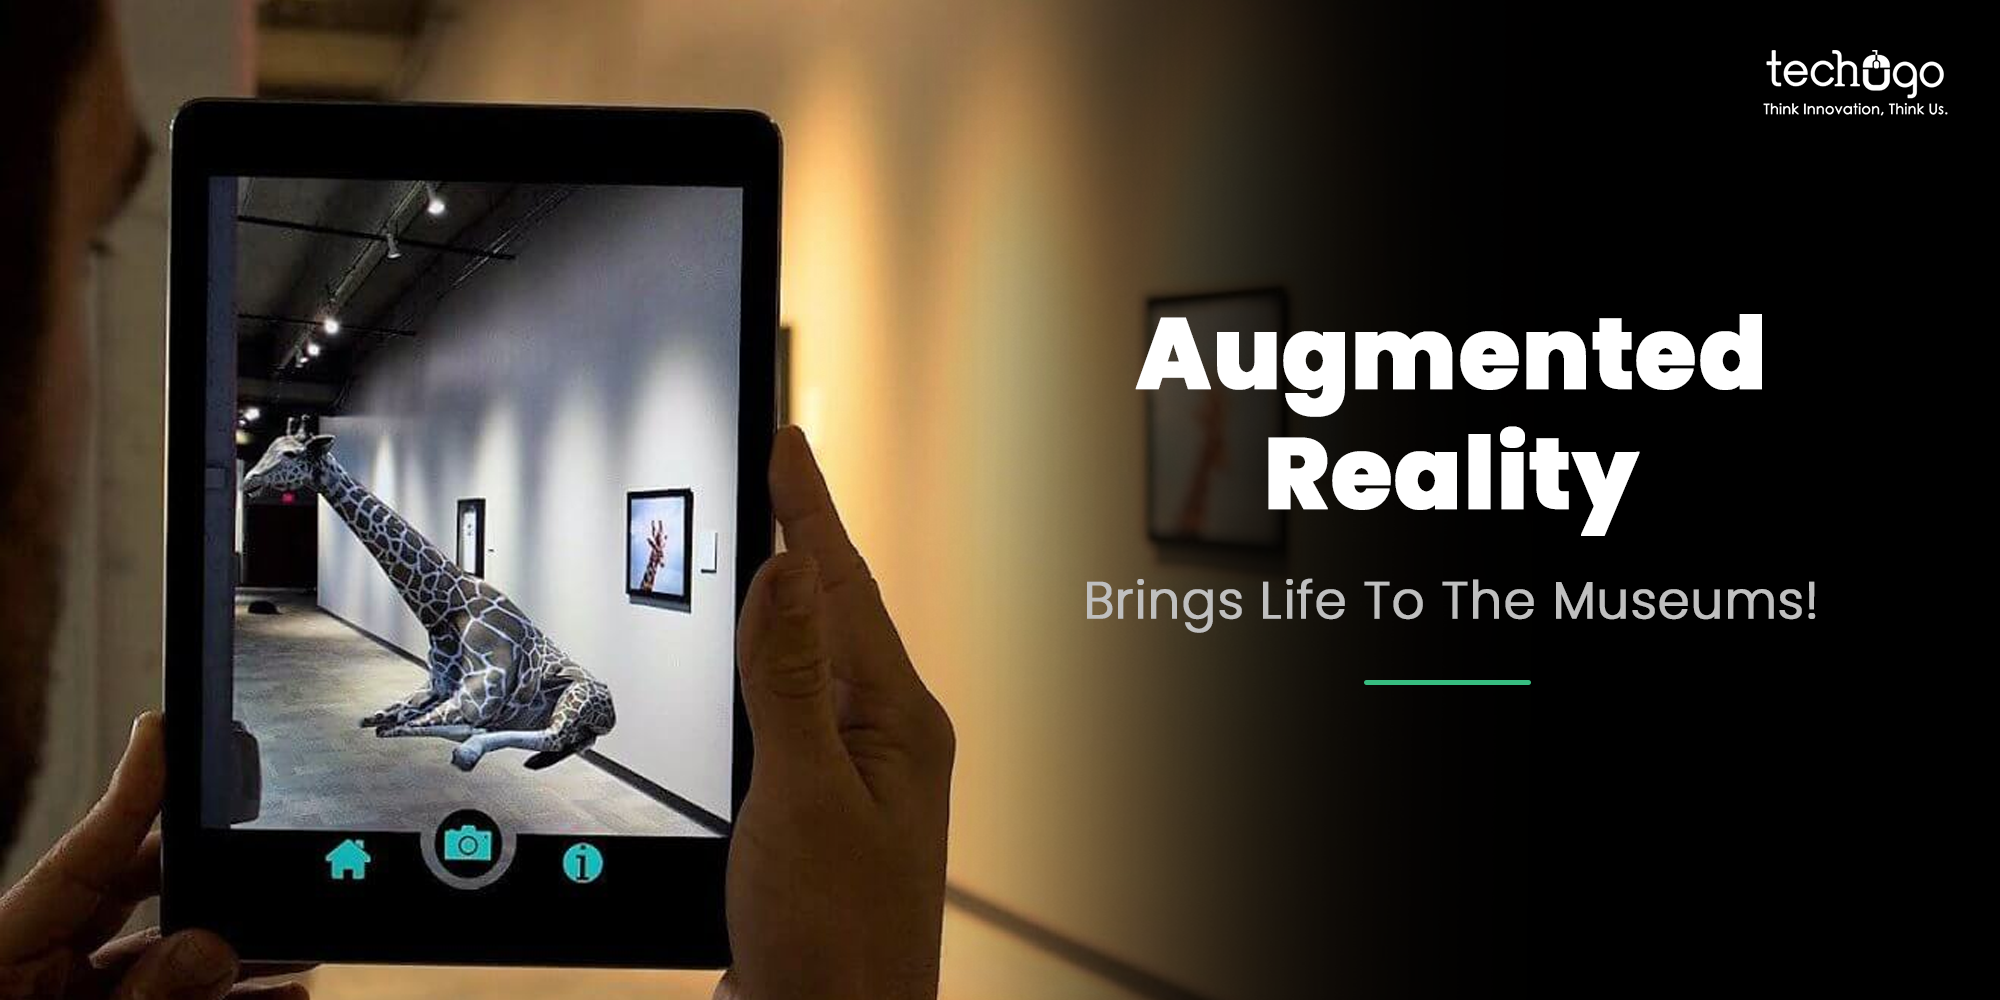 Augmented Reality Brings Life To The Museums